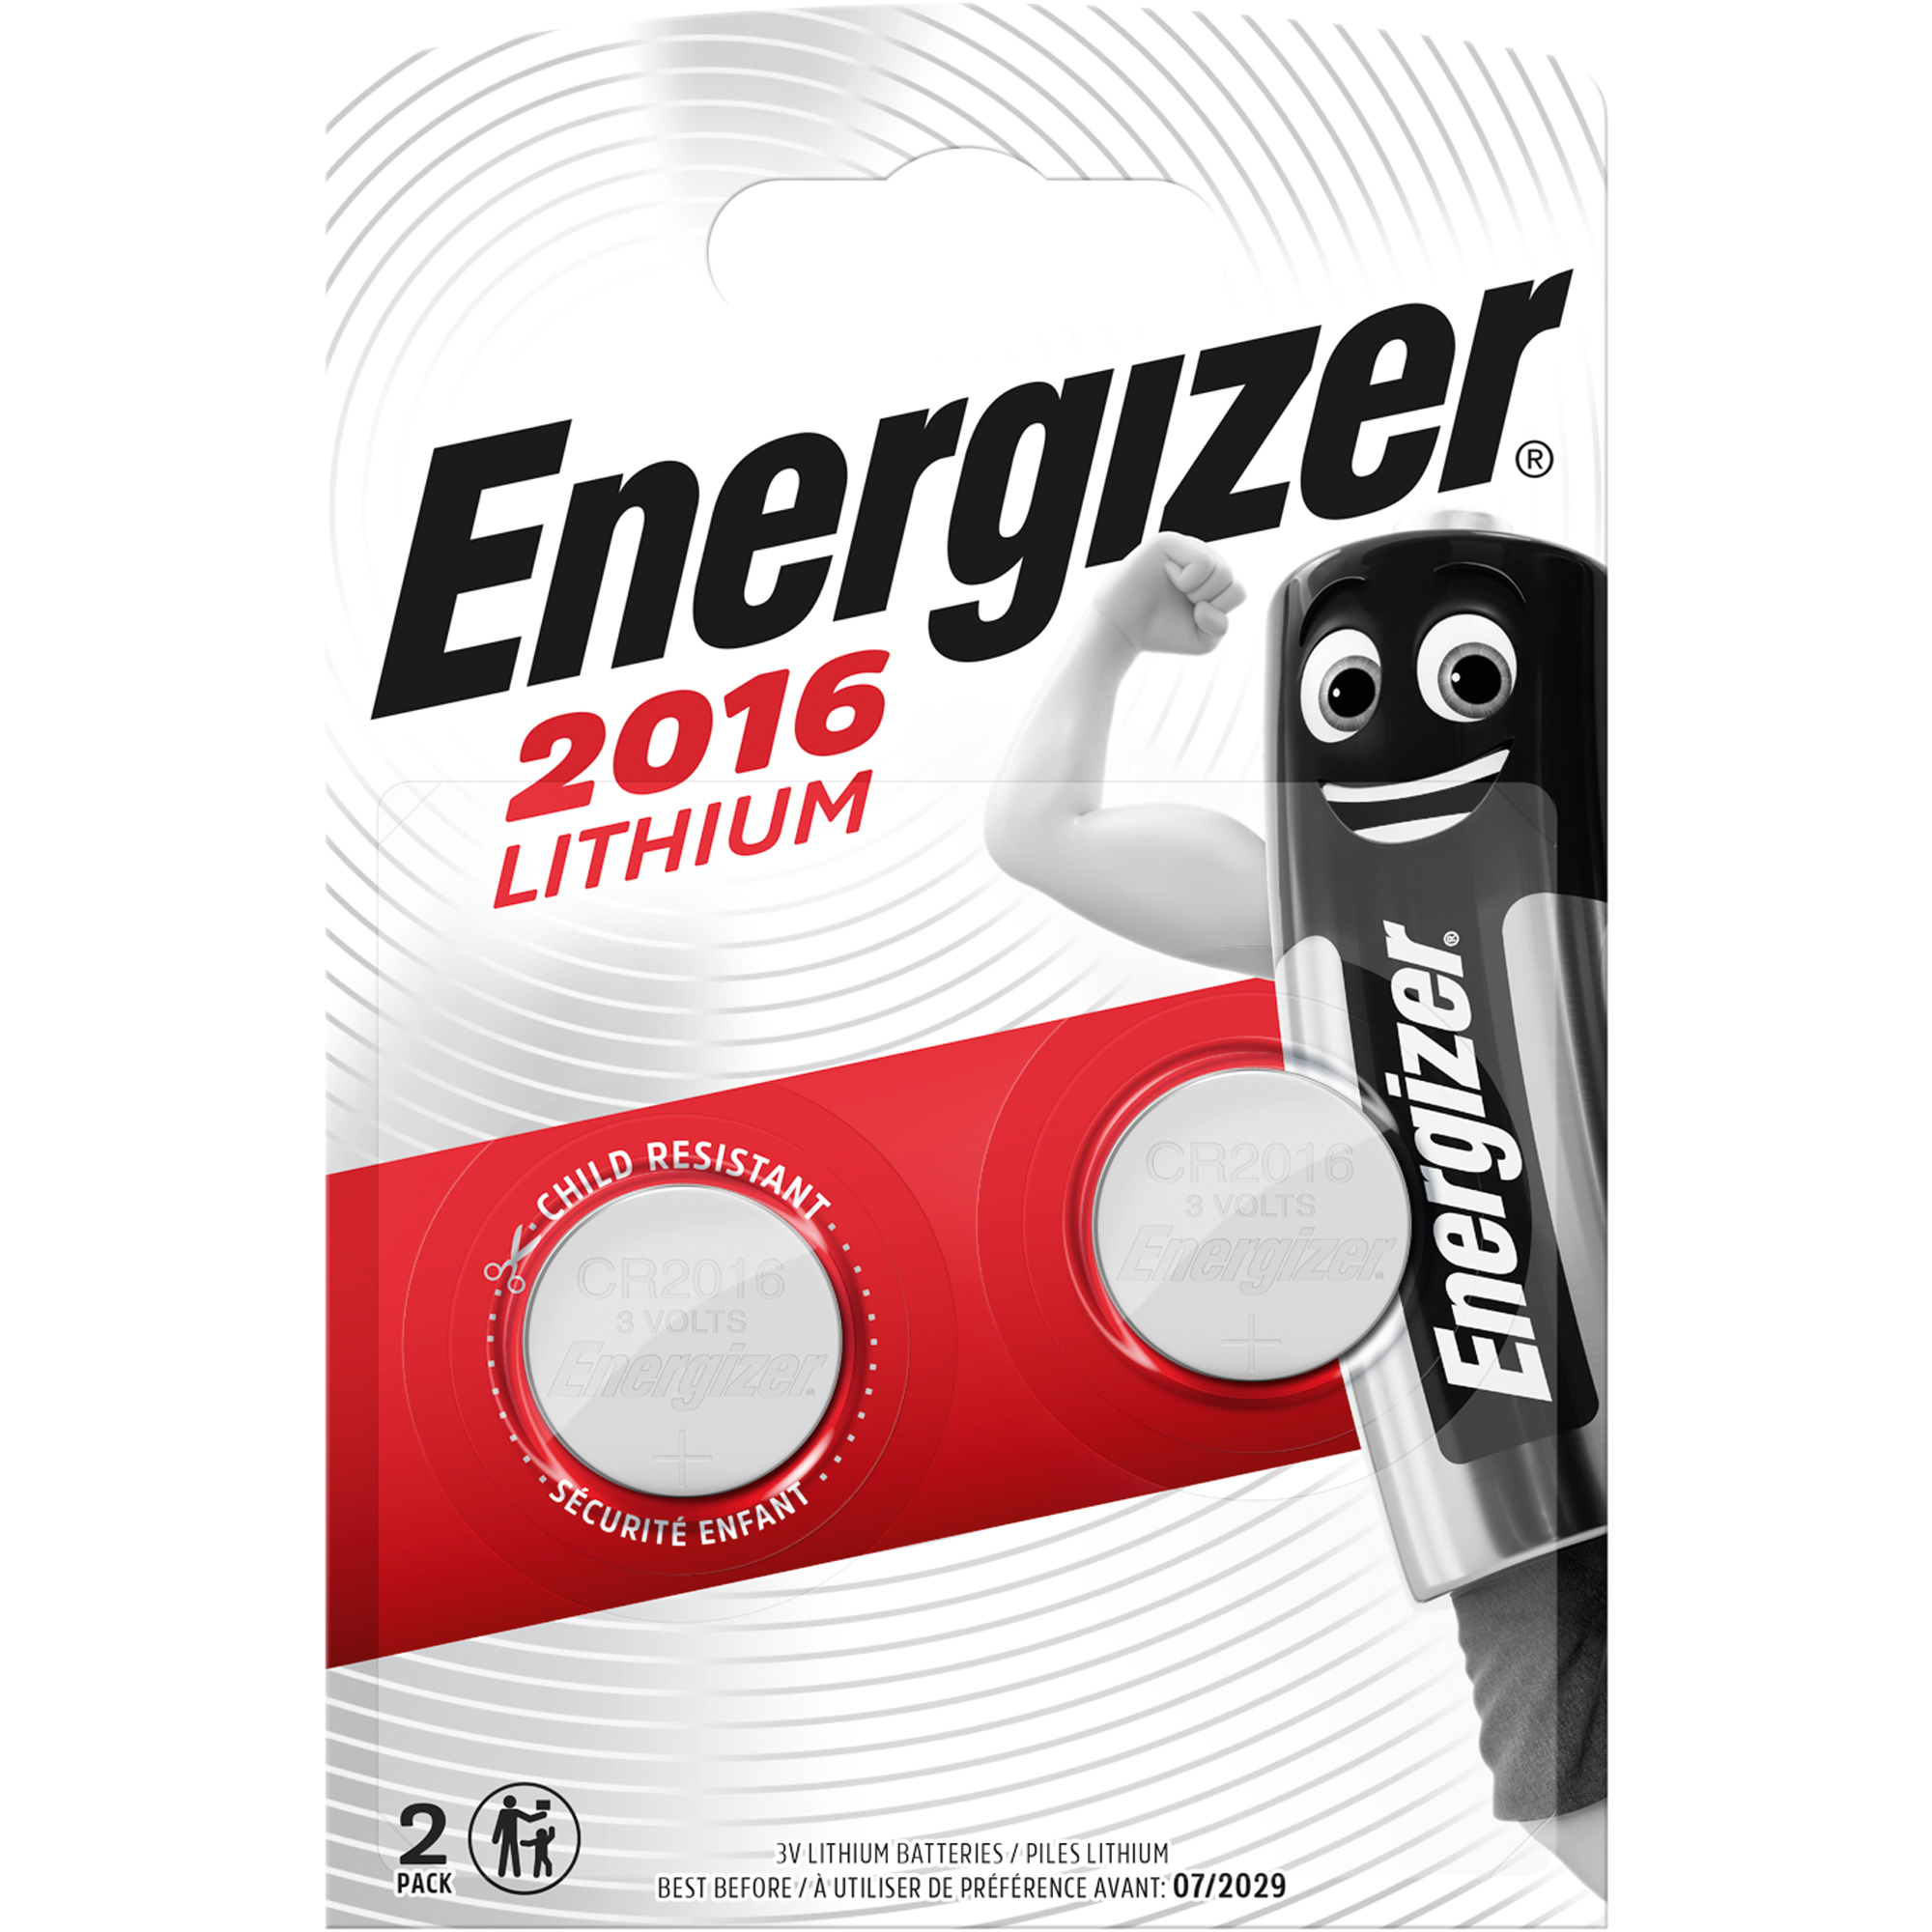 Energizer Knopfzelle CR 2016 E301021902 Lithium 2 St.Pack.